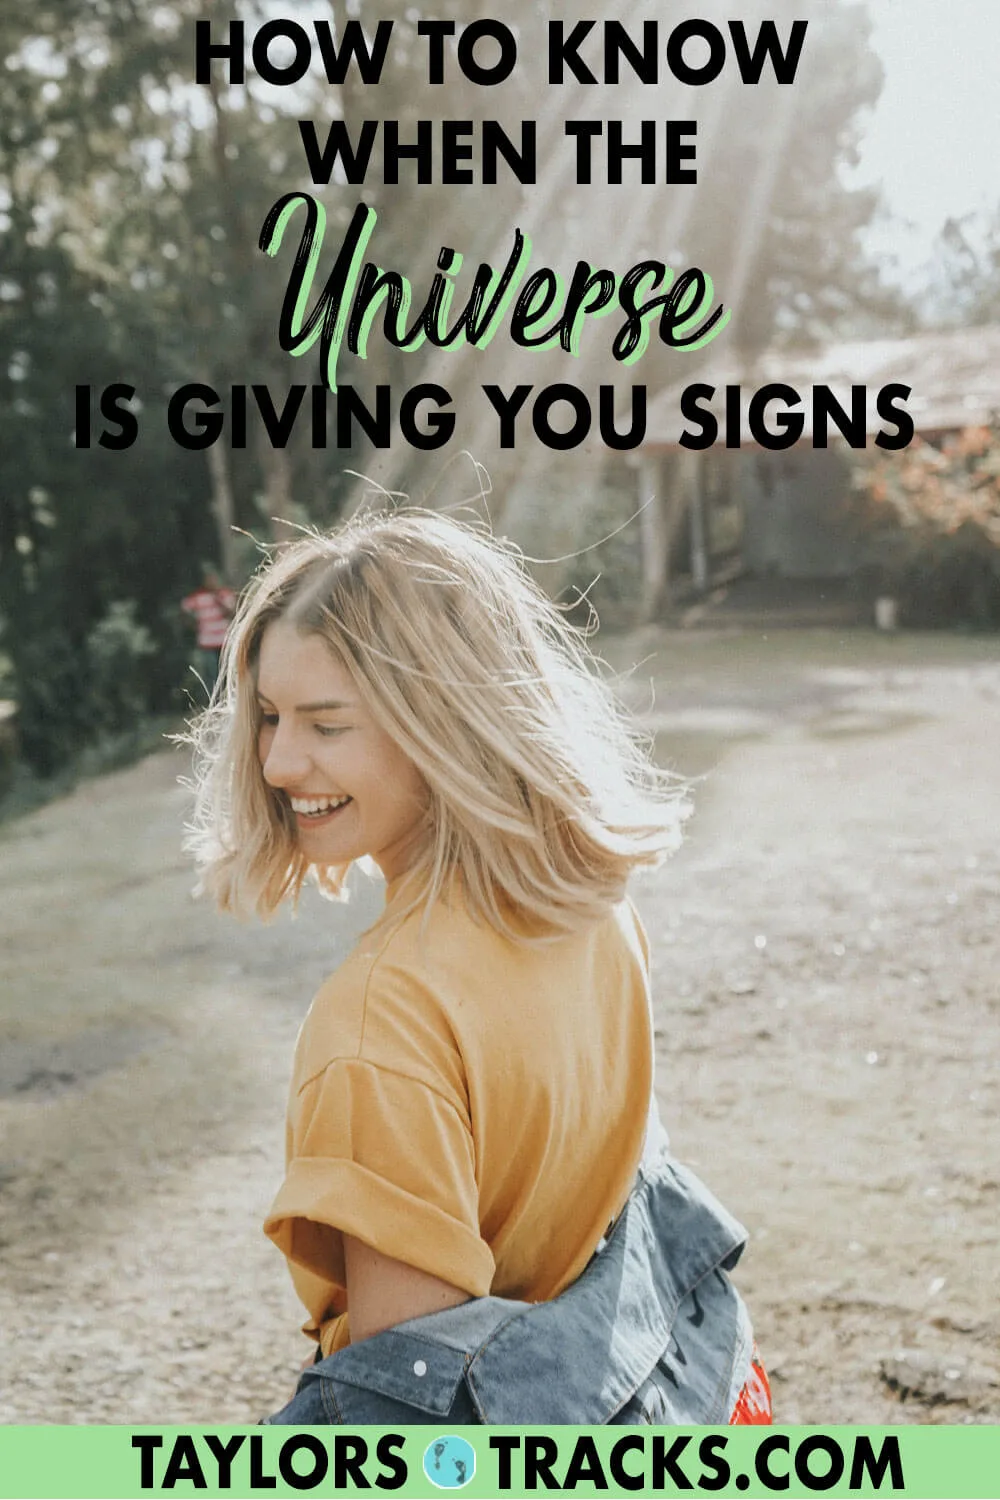 Signs from the universe are oftentimes more simple and frequent that many believe. Whether you’re spiritual or not, these simple universe signs are a great way to get more in touch with your intuition, have some fun, and have a little pressure taken off knowing that you’re not alone. Click to find out how the universe is already communicating with you!